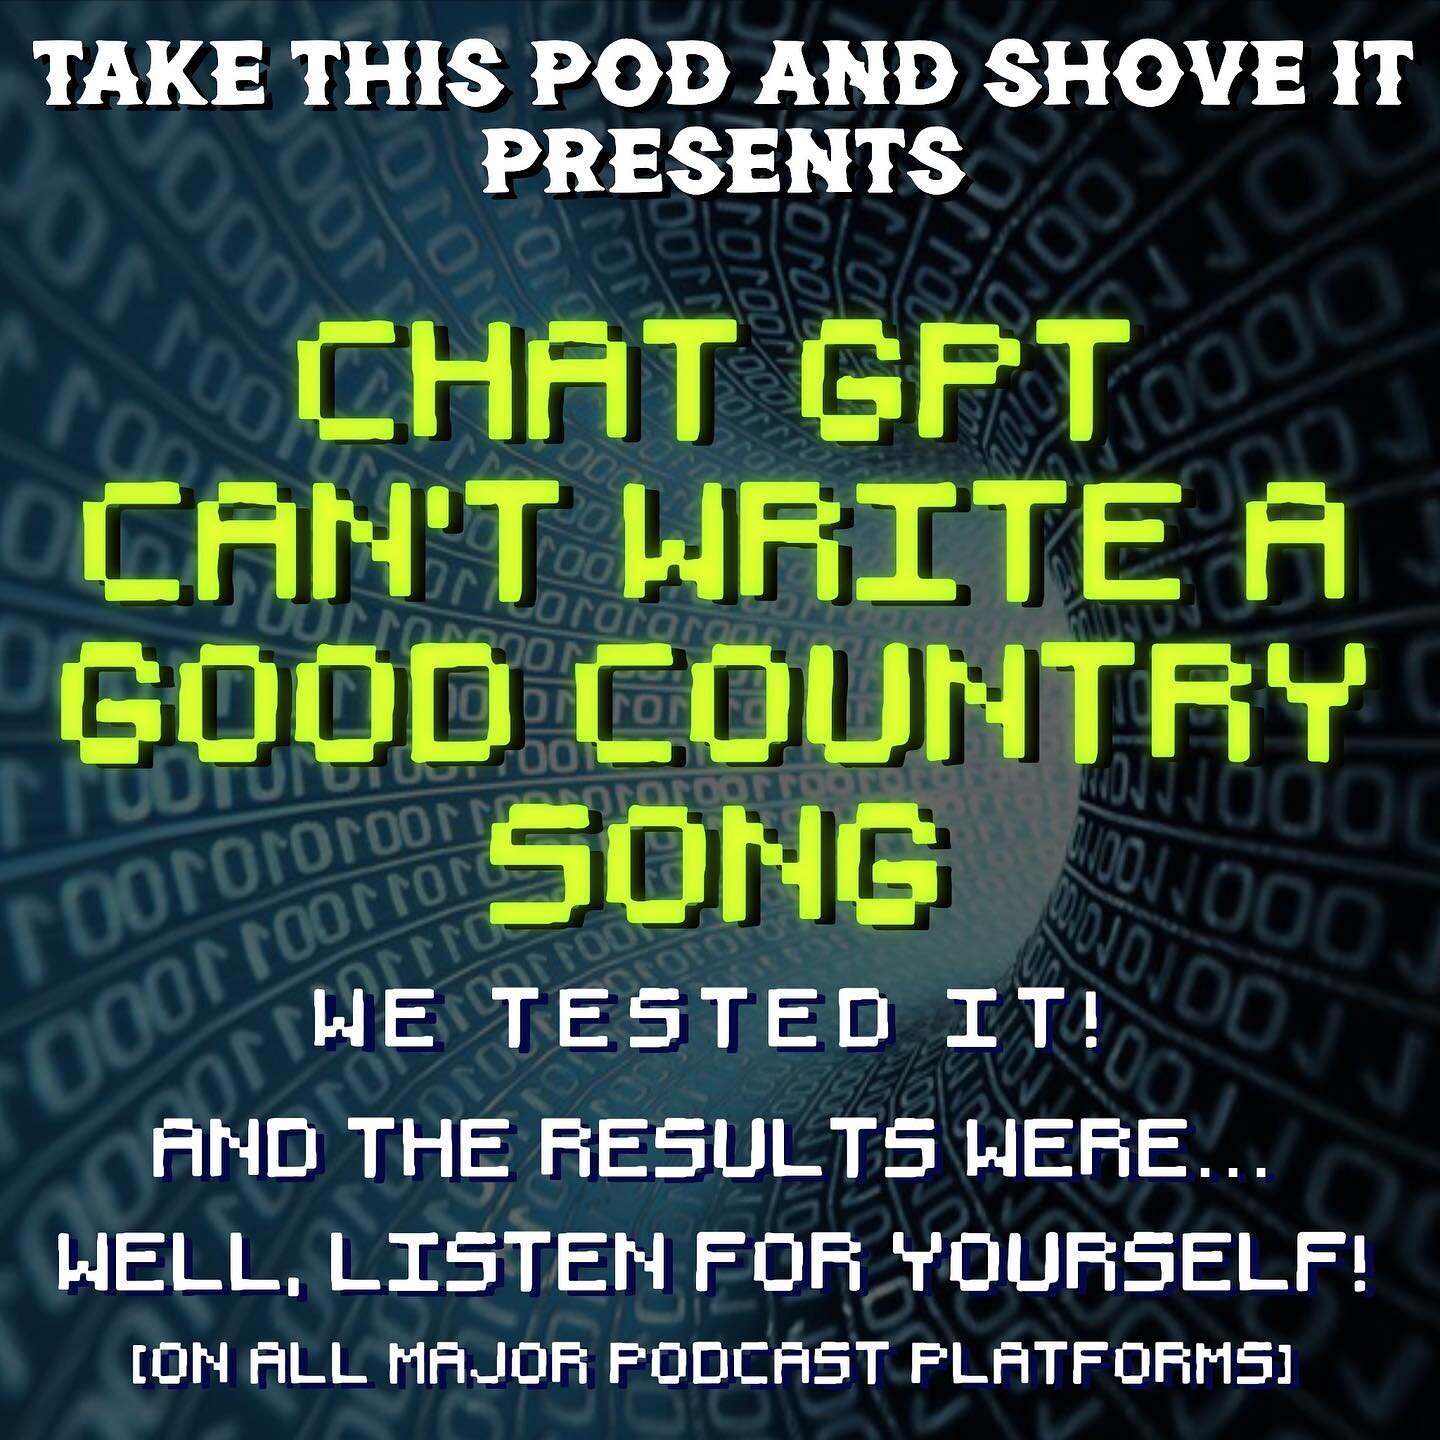 Artificial Intelligence is becoming increasingly commonplace and controversial. On this week&rsquo;s episode we experiment with Chat GPT&lsquo;s ability to write a decent country song. Musical innovation, good imitation, or bland plagiarism based on 